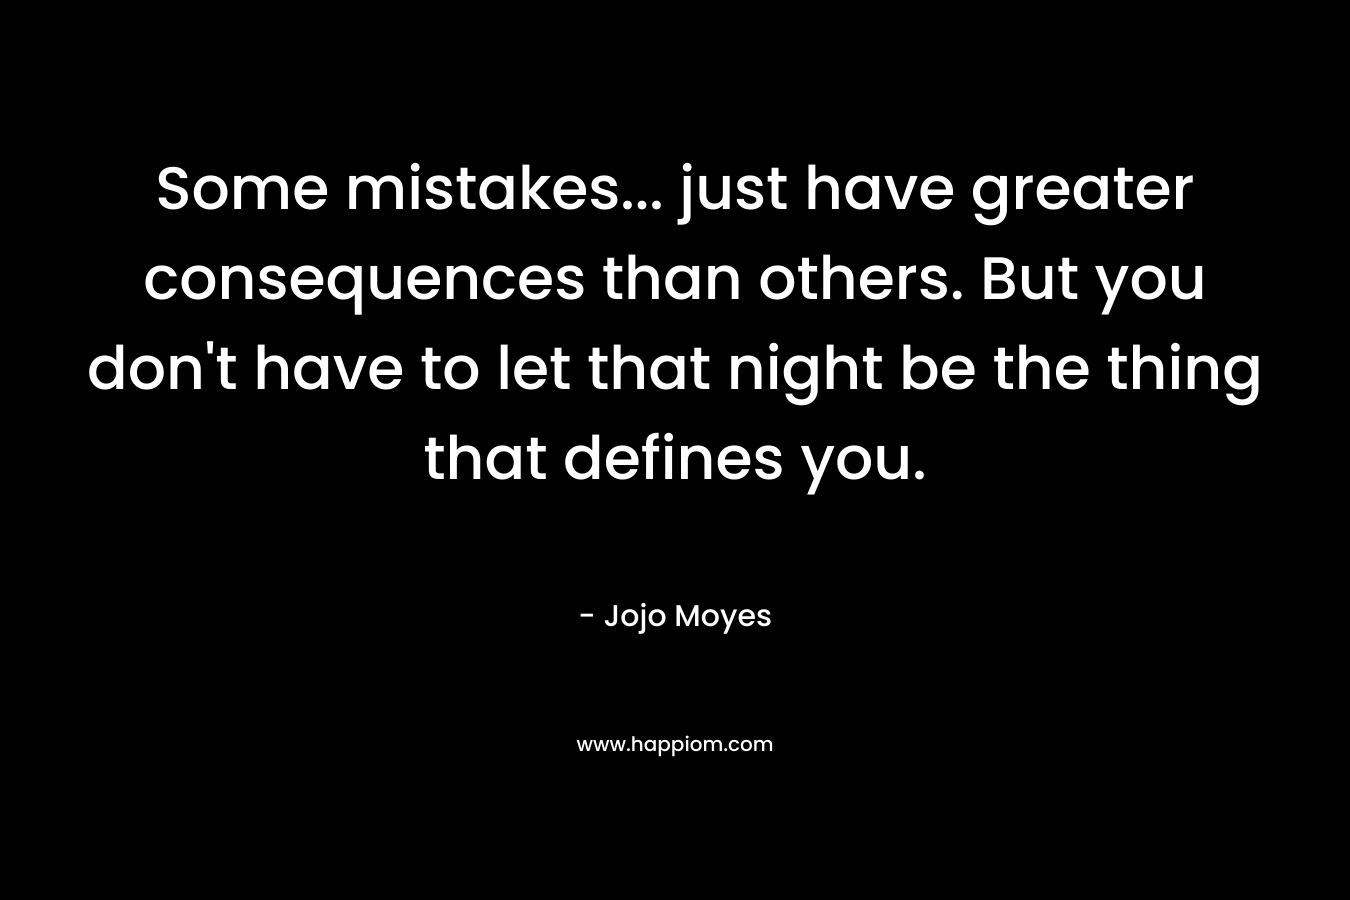 Some mistakes… just have greater consequences than others. But you don’t have to let that night be the thing that defines you. – Jojo Moyes